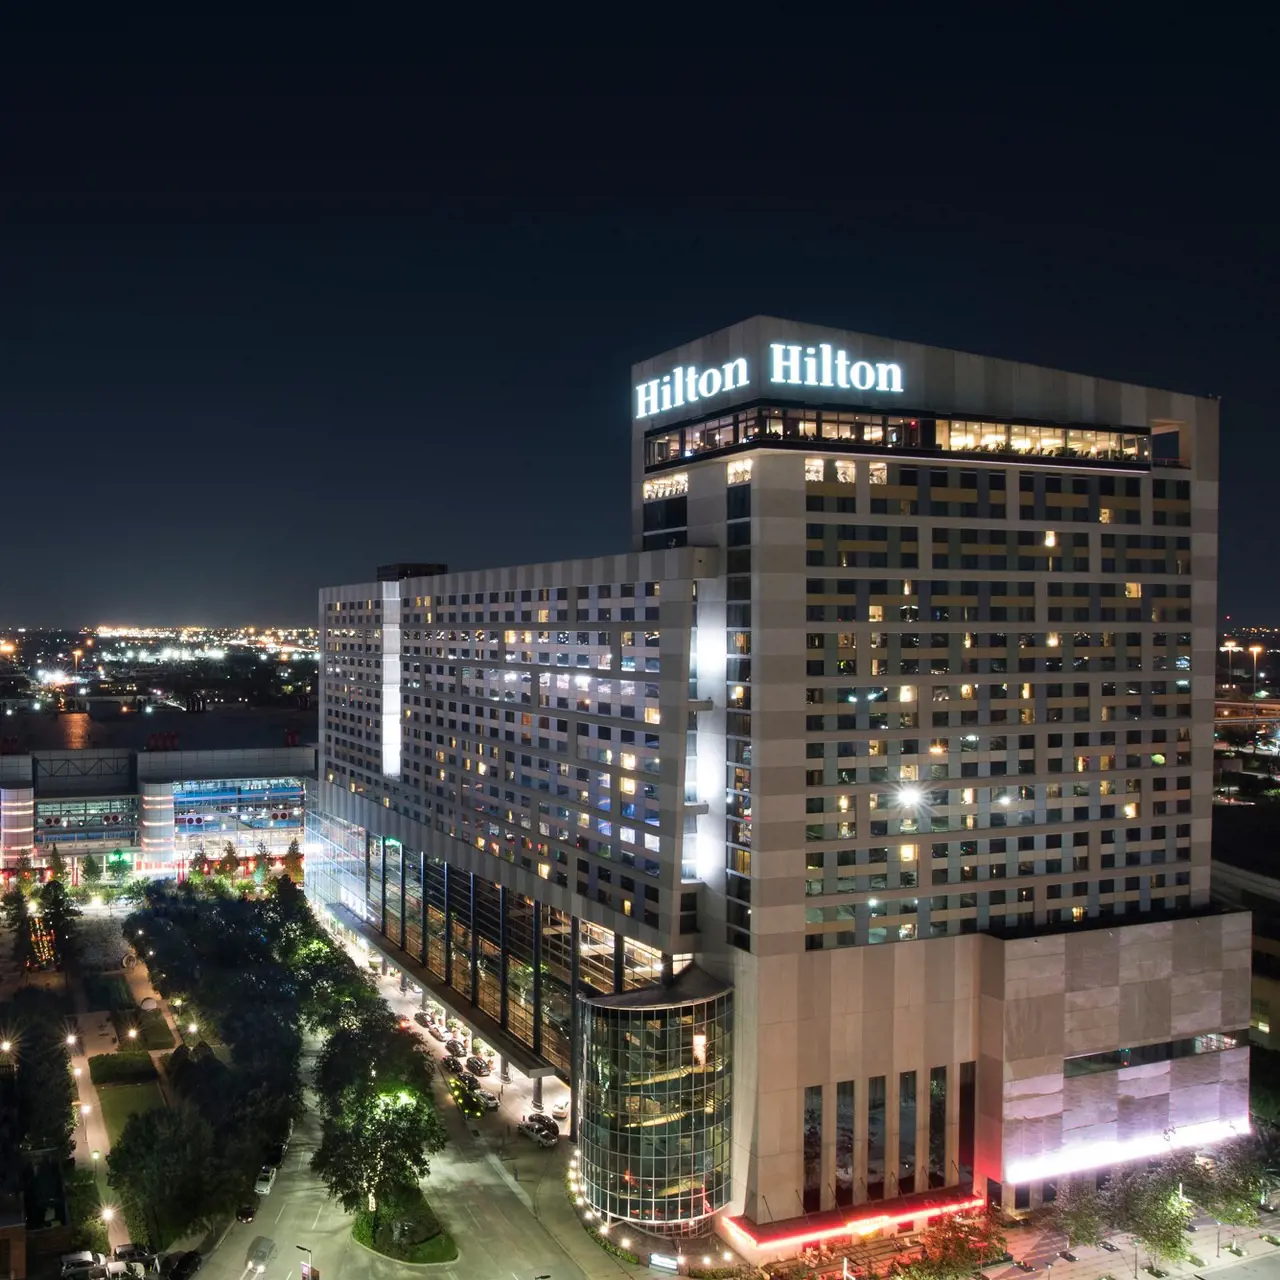 Nightview picture of Hilton Americas in Houston USA